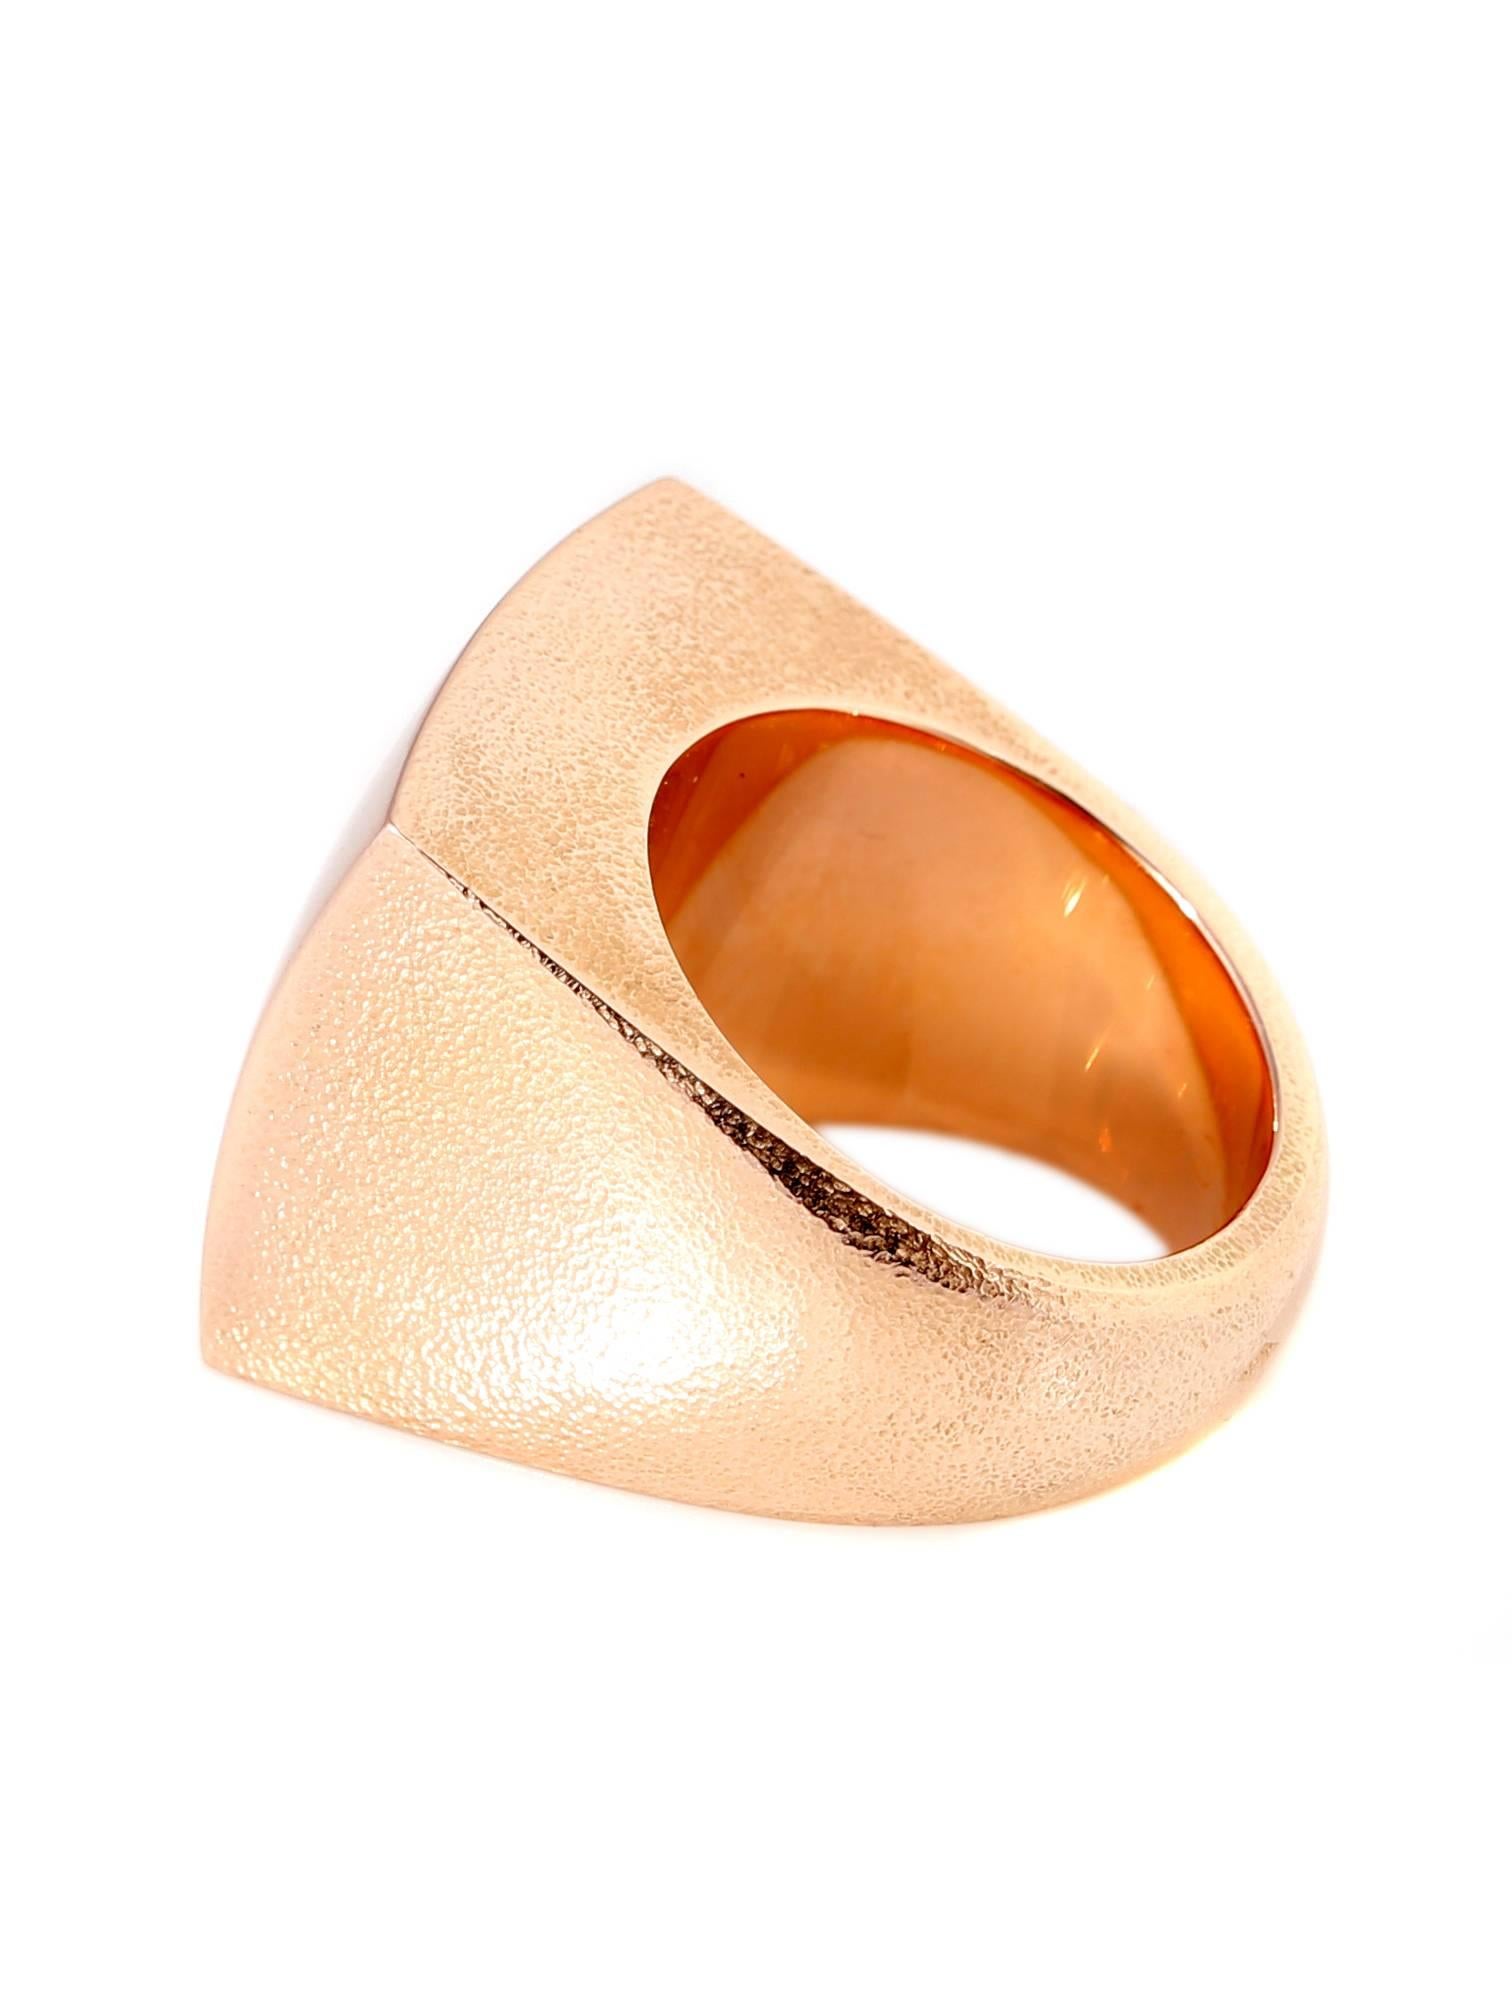 square gold ring